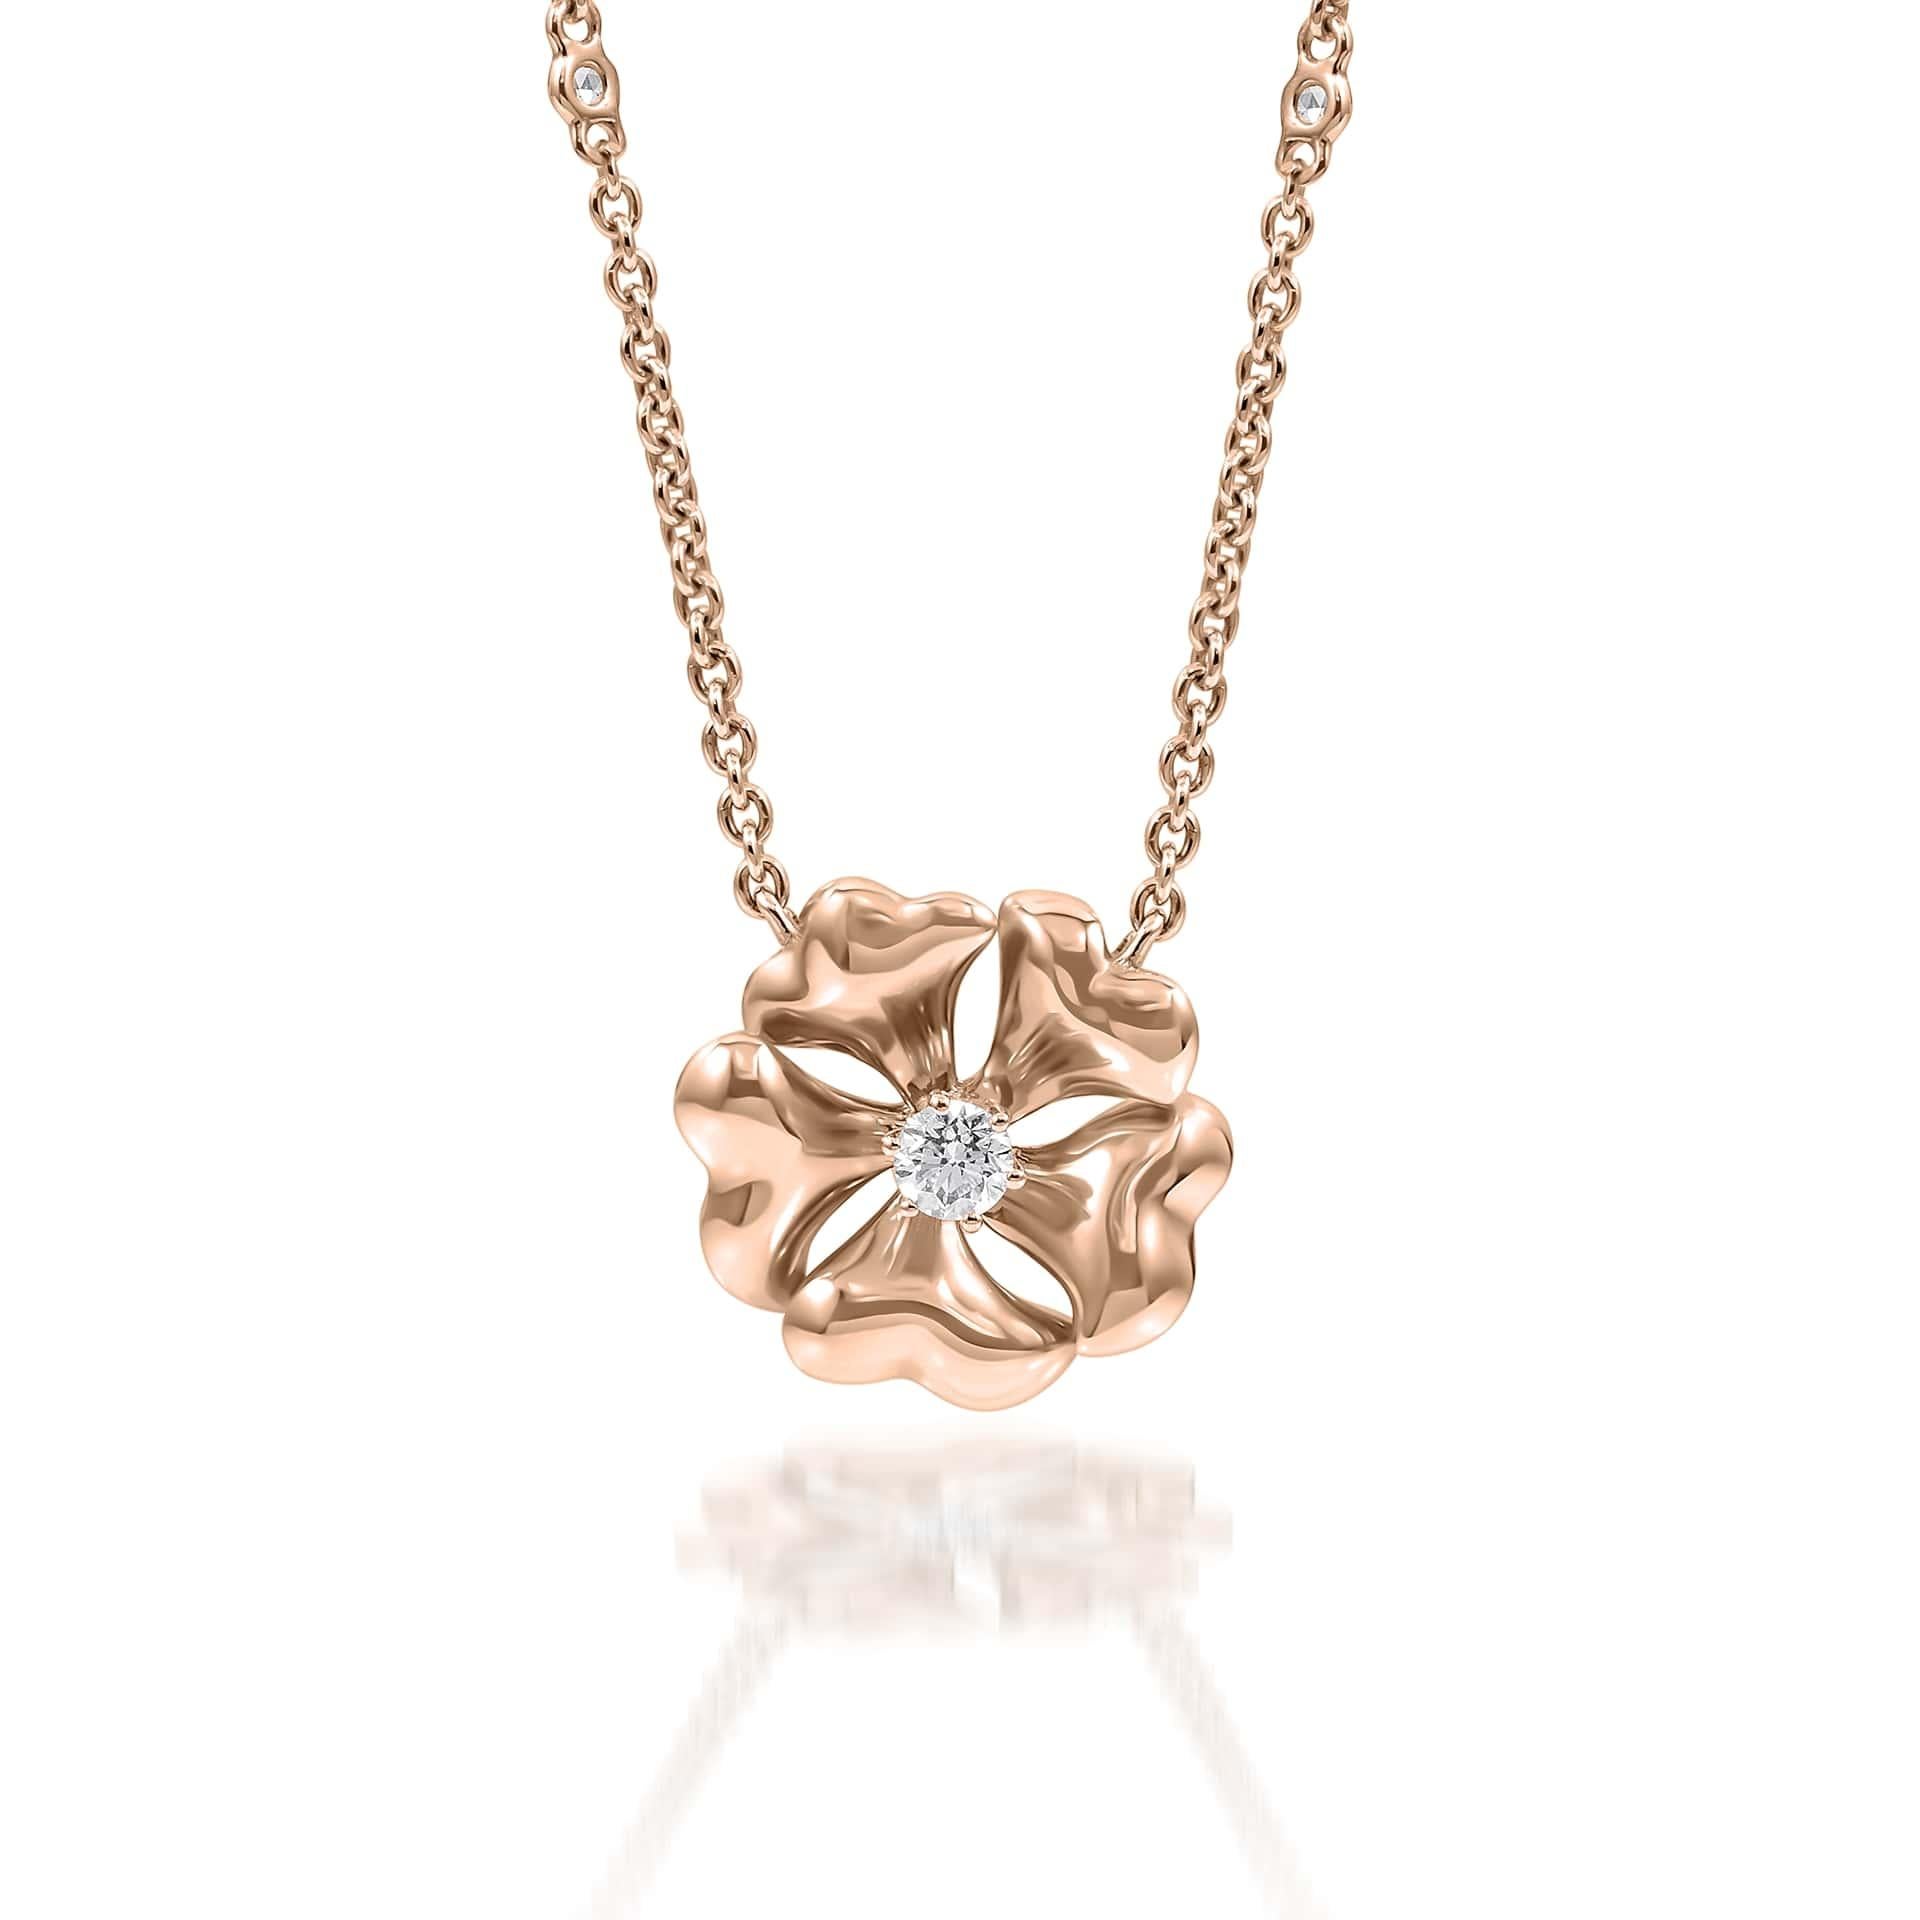 Bloom Gold and Diamond Flower Necklace in 18K Rose Gold

Inspired by the exquisite petals of the alpine cinquefoil flower, the Bloom collection combines the richness of diamonds and precious metals with the light versatility of this delicate,